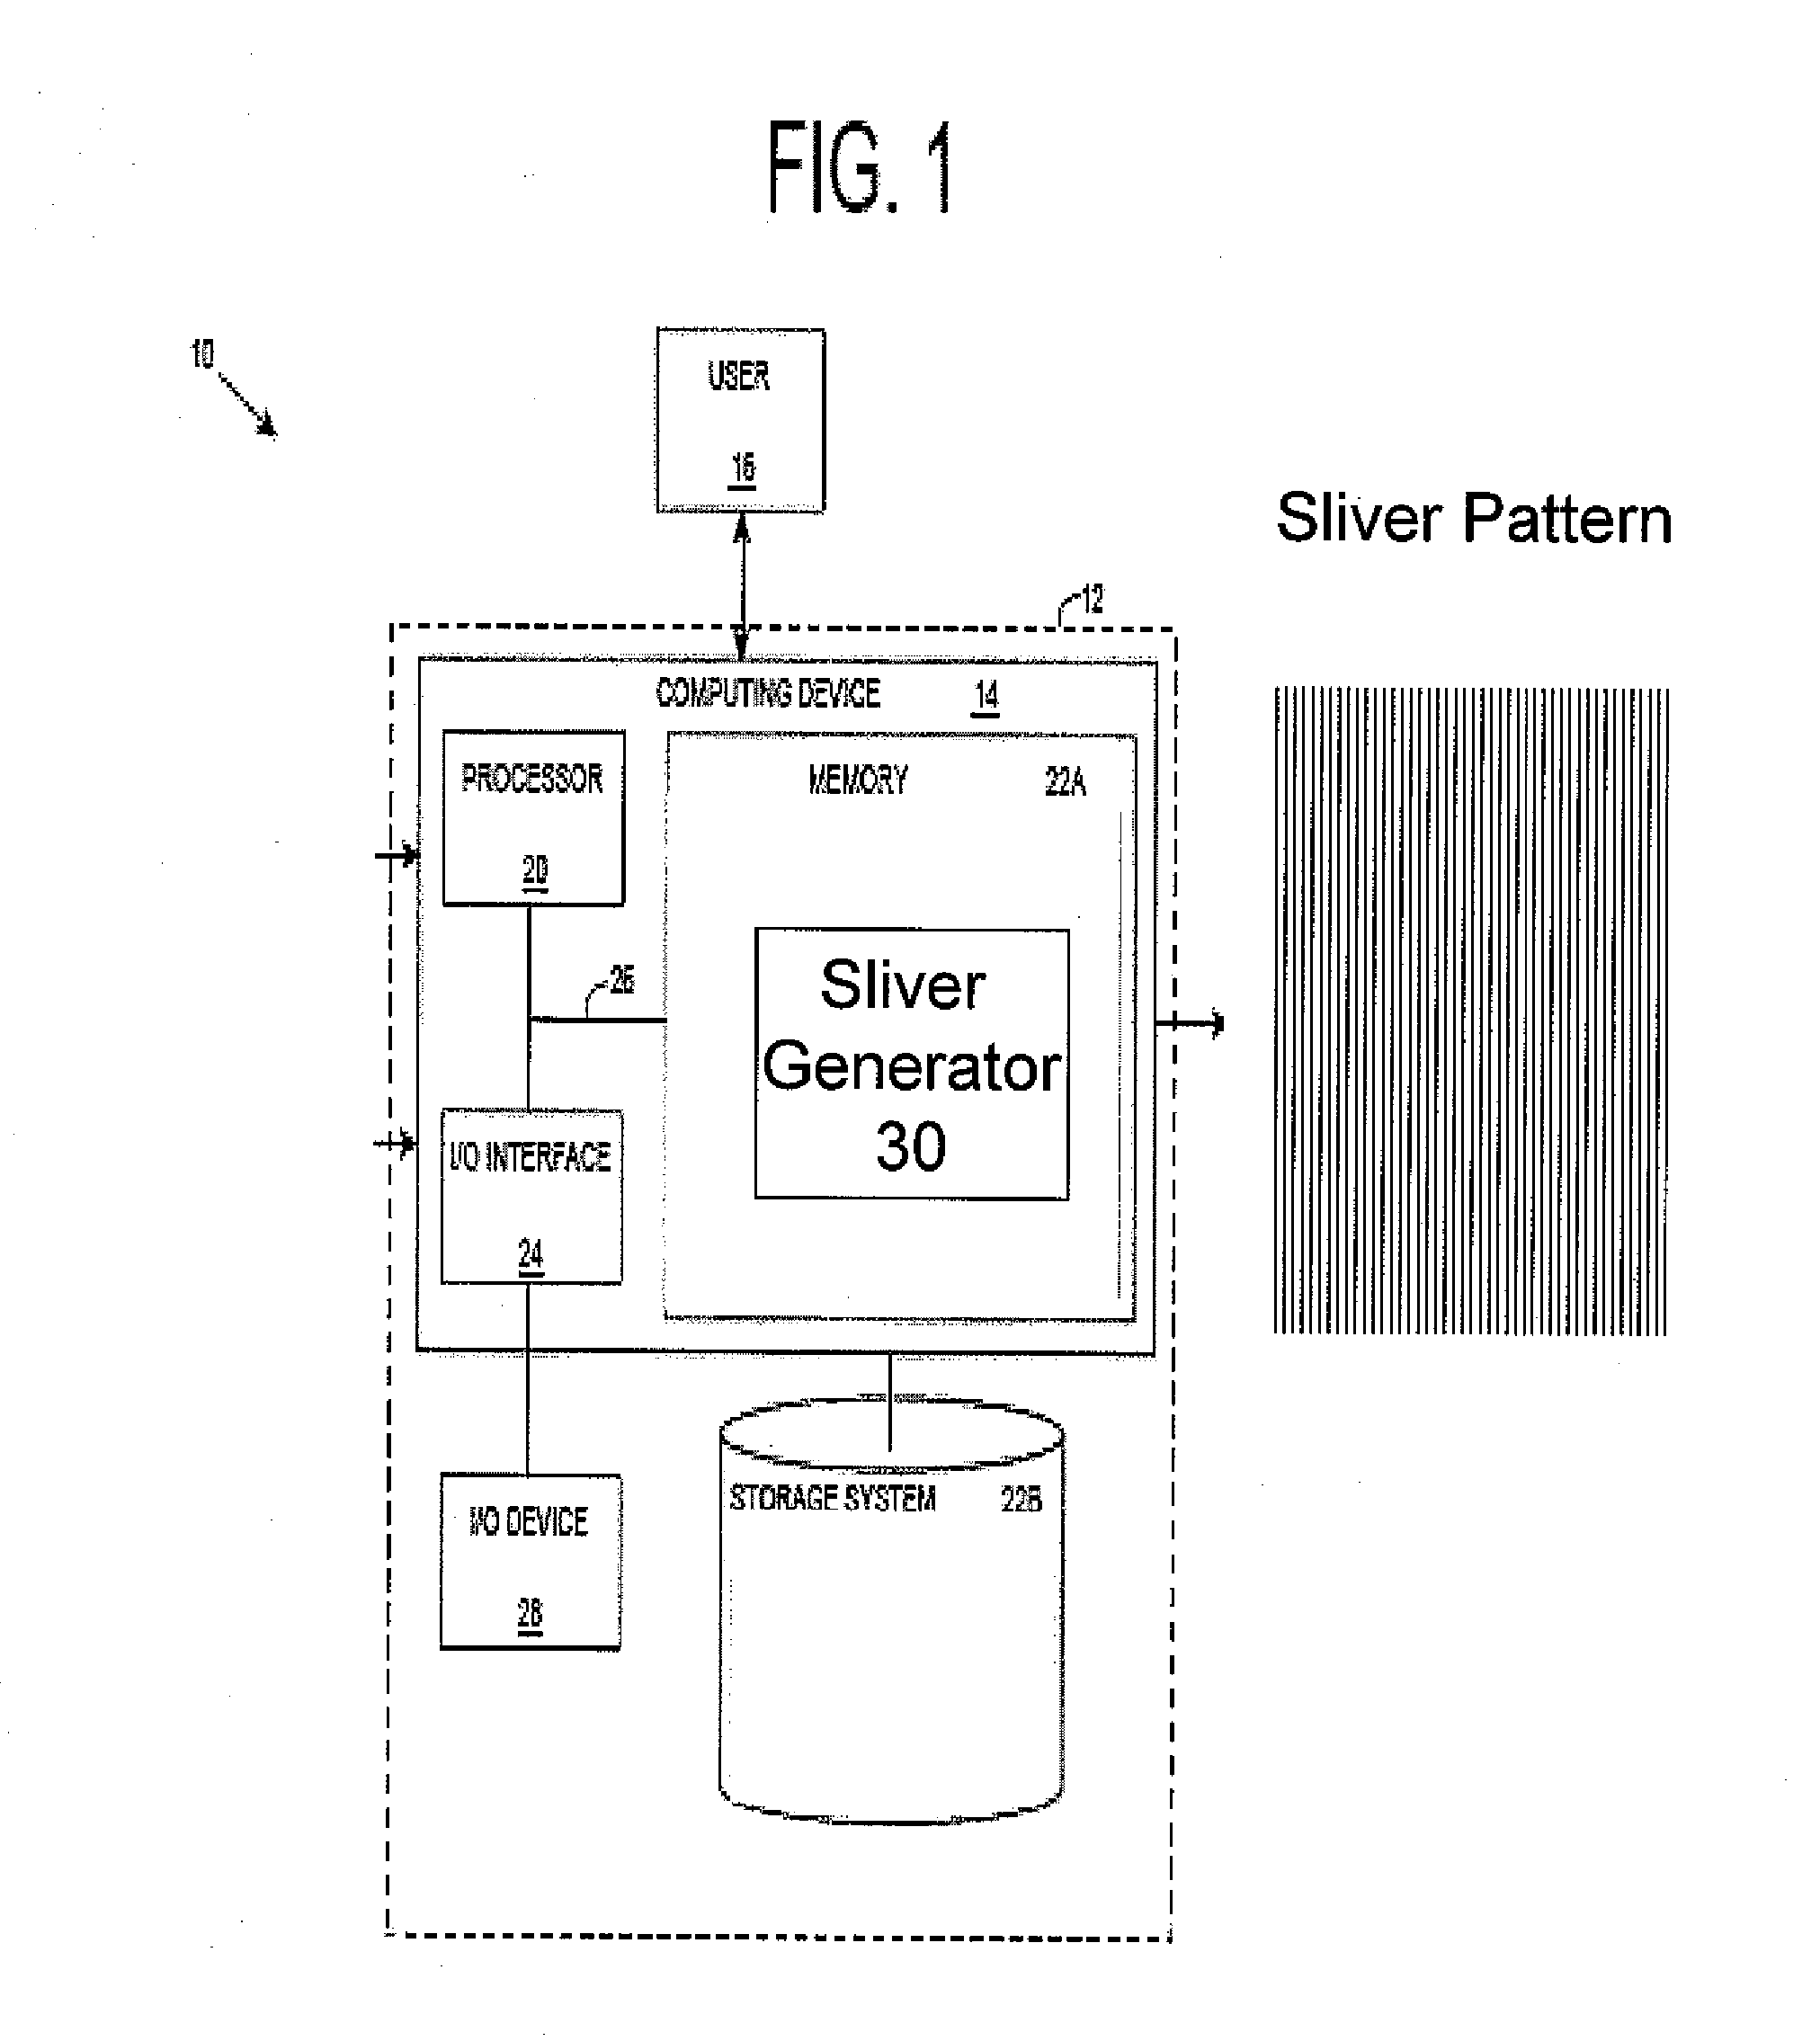 Method and apparatus of rapid determination of problematic areas in VLSI layout by oriented sliver sampling